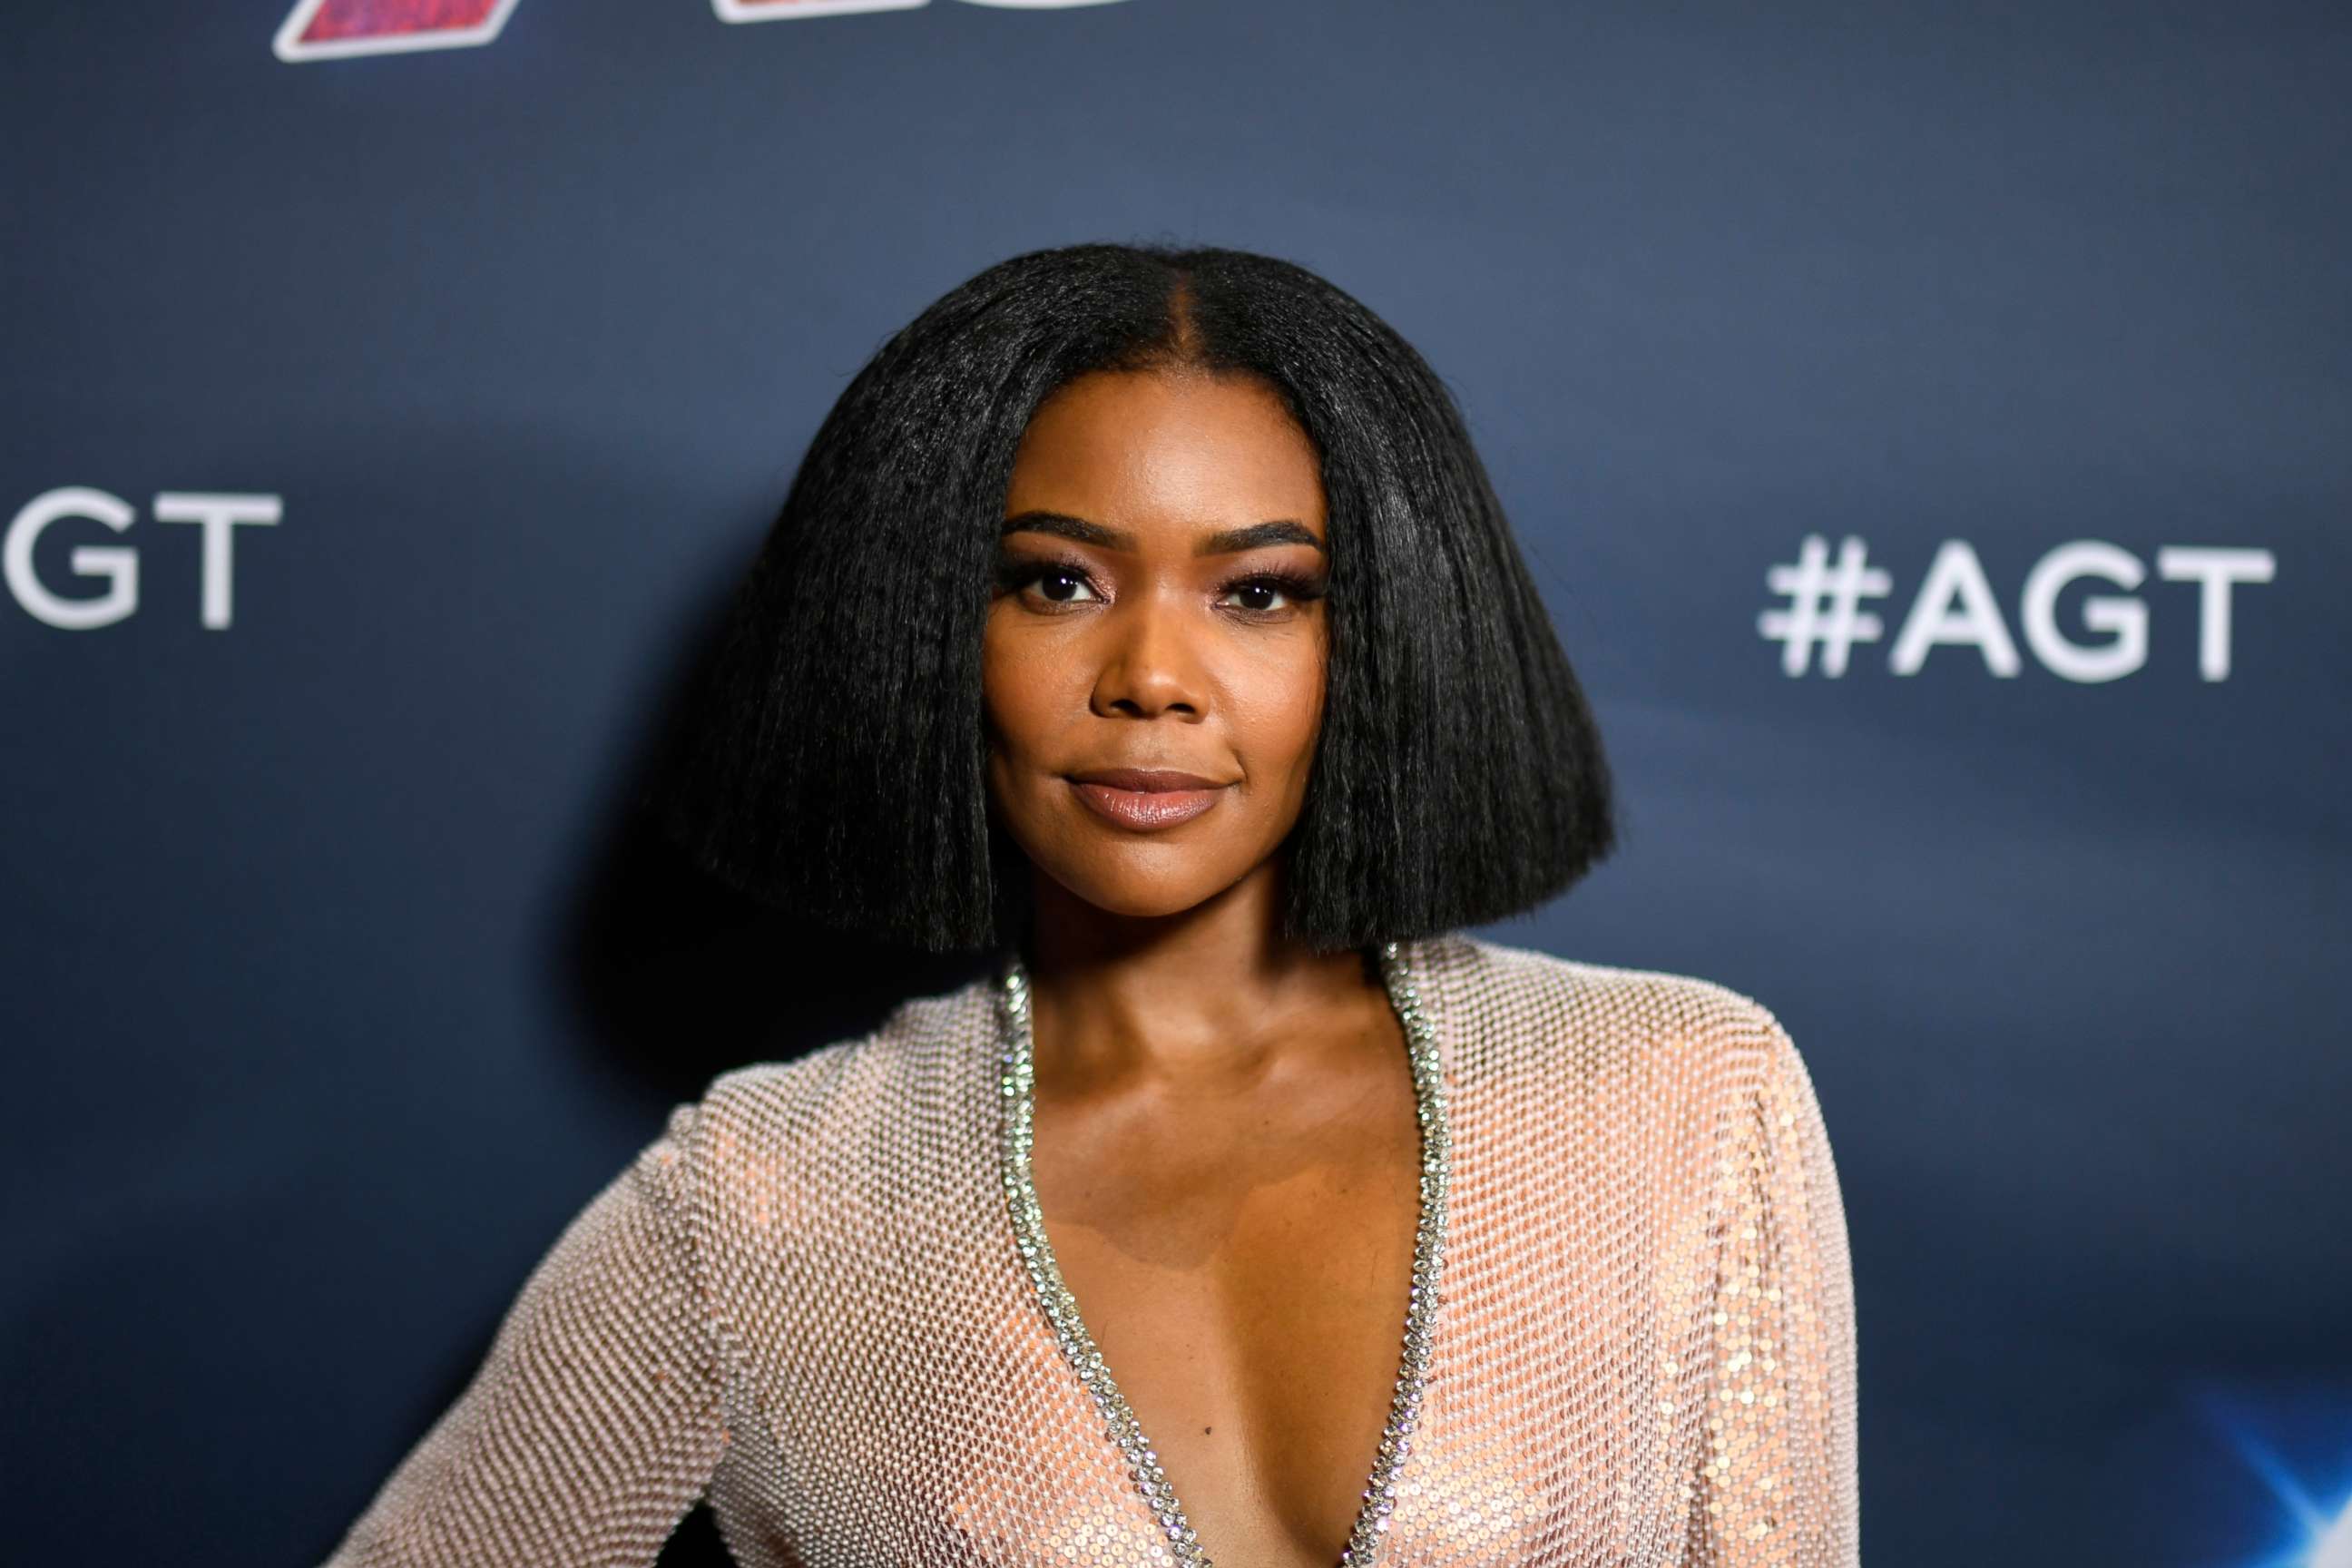 PHOTO: Gabrielle Union attends "America's Got Talent" Season 14 Finale Red Carpet at Dolby Theatre, Sept. 18, 2019, in Hollywood, Calif.